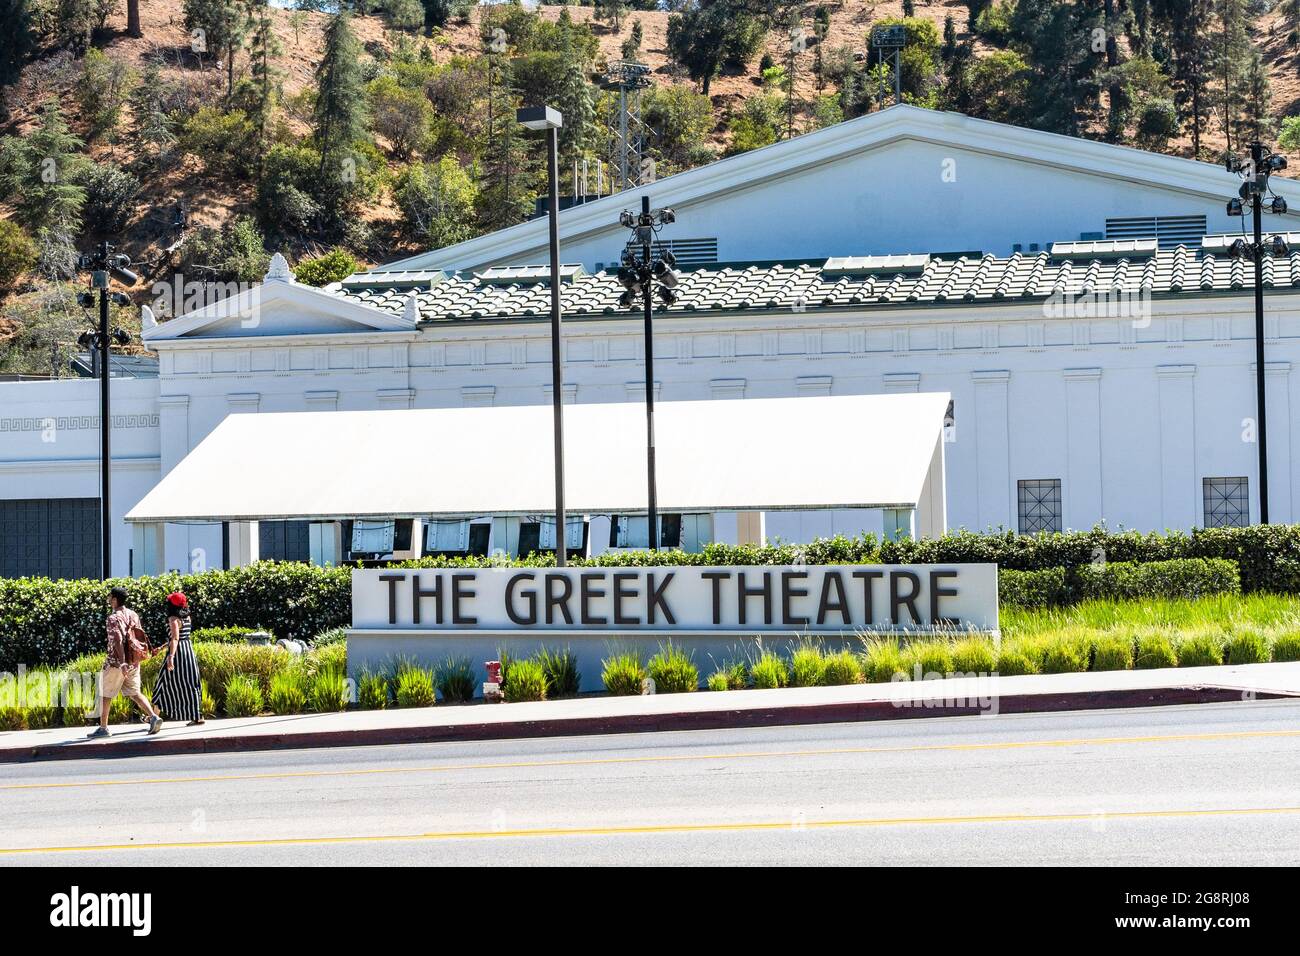 Greek theatre is an open air amphitheater for concerts in Griffith Park, CA Stock Photo